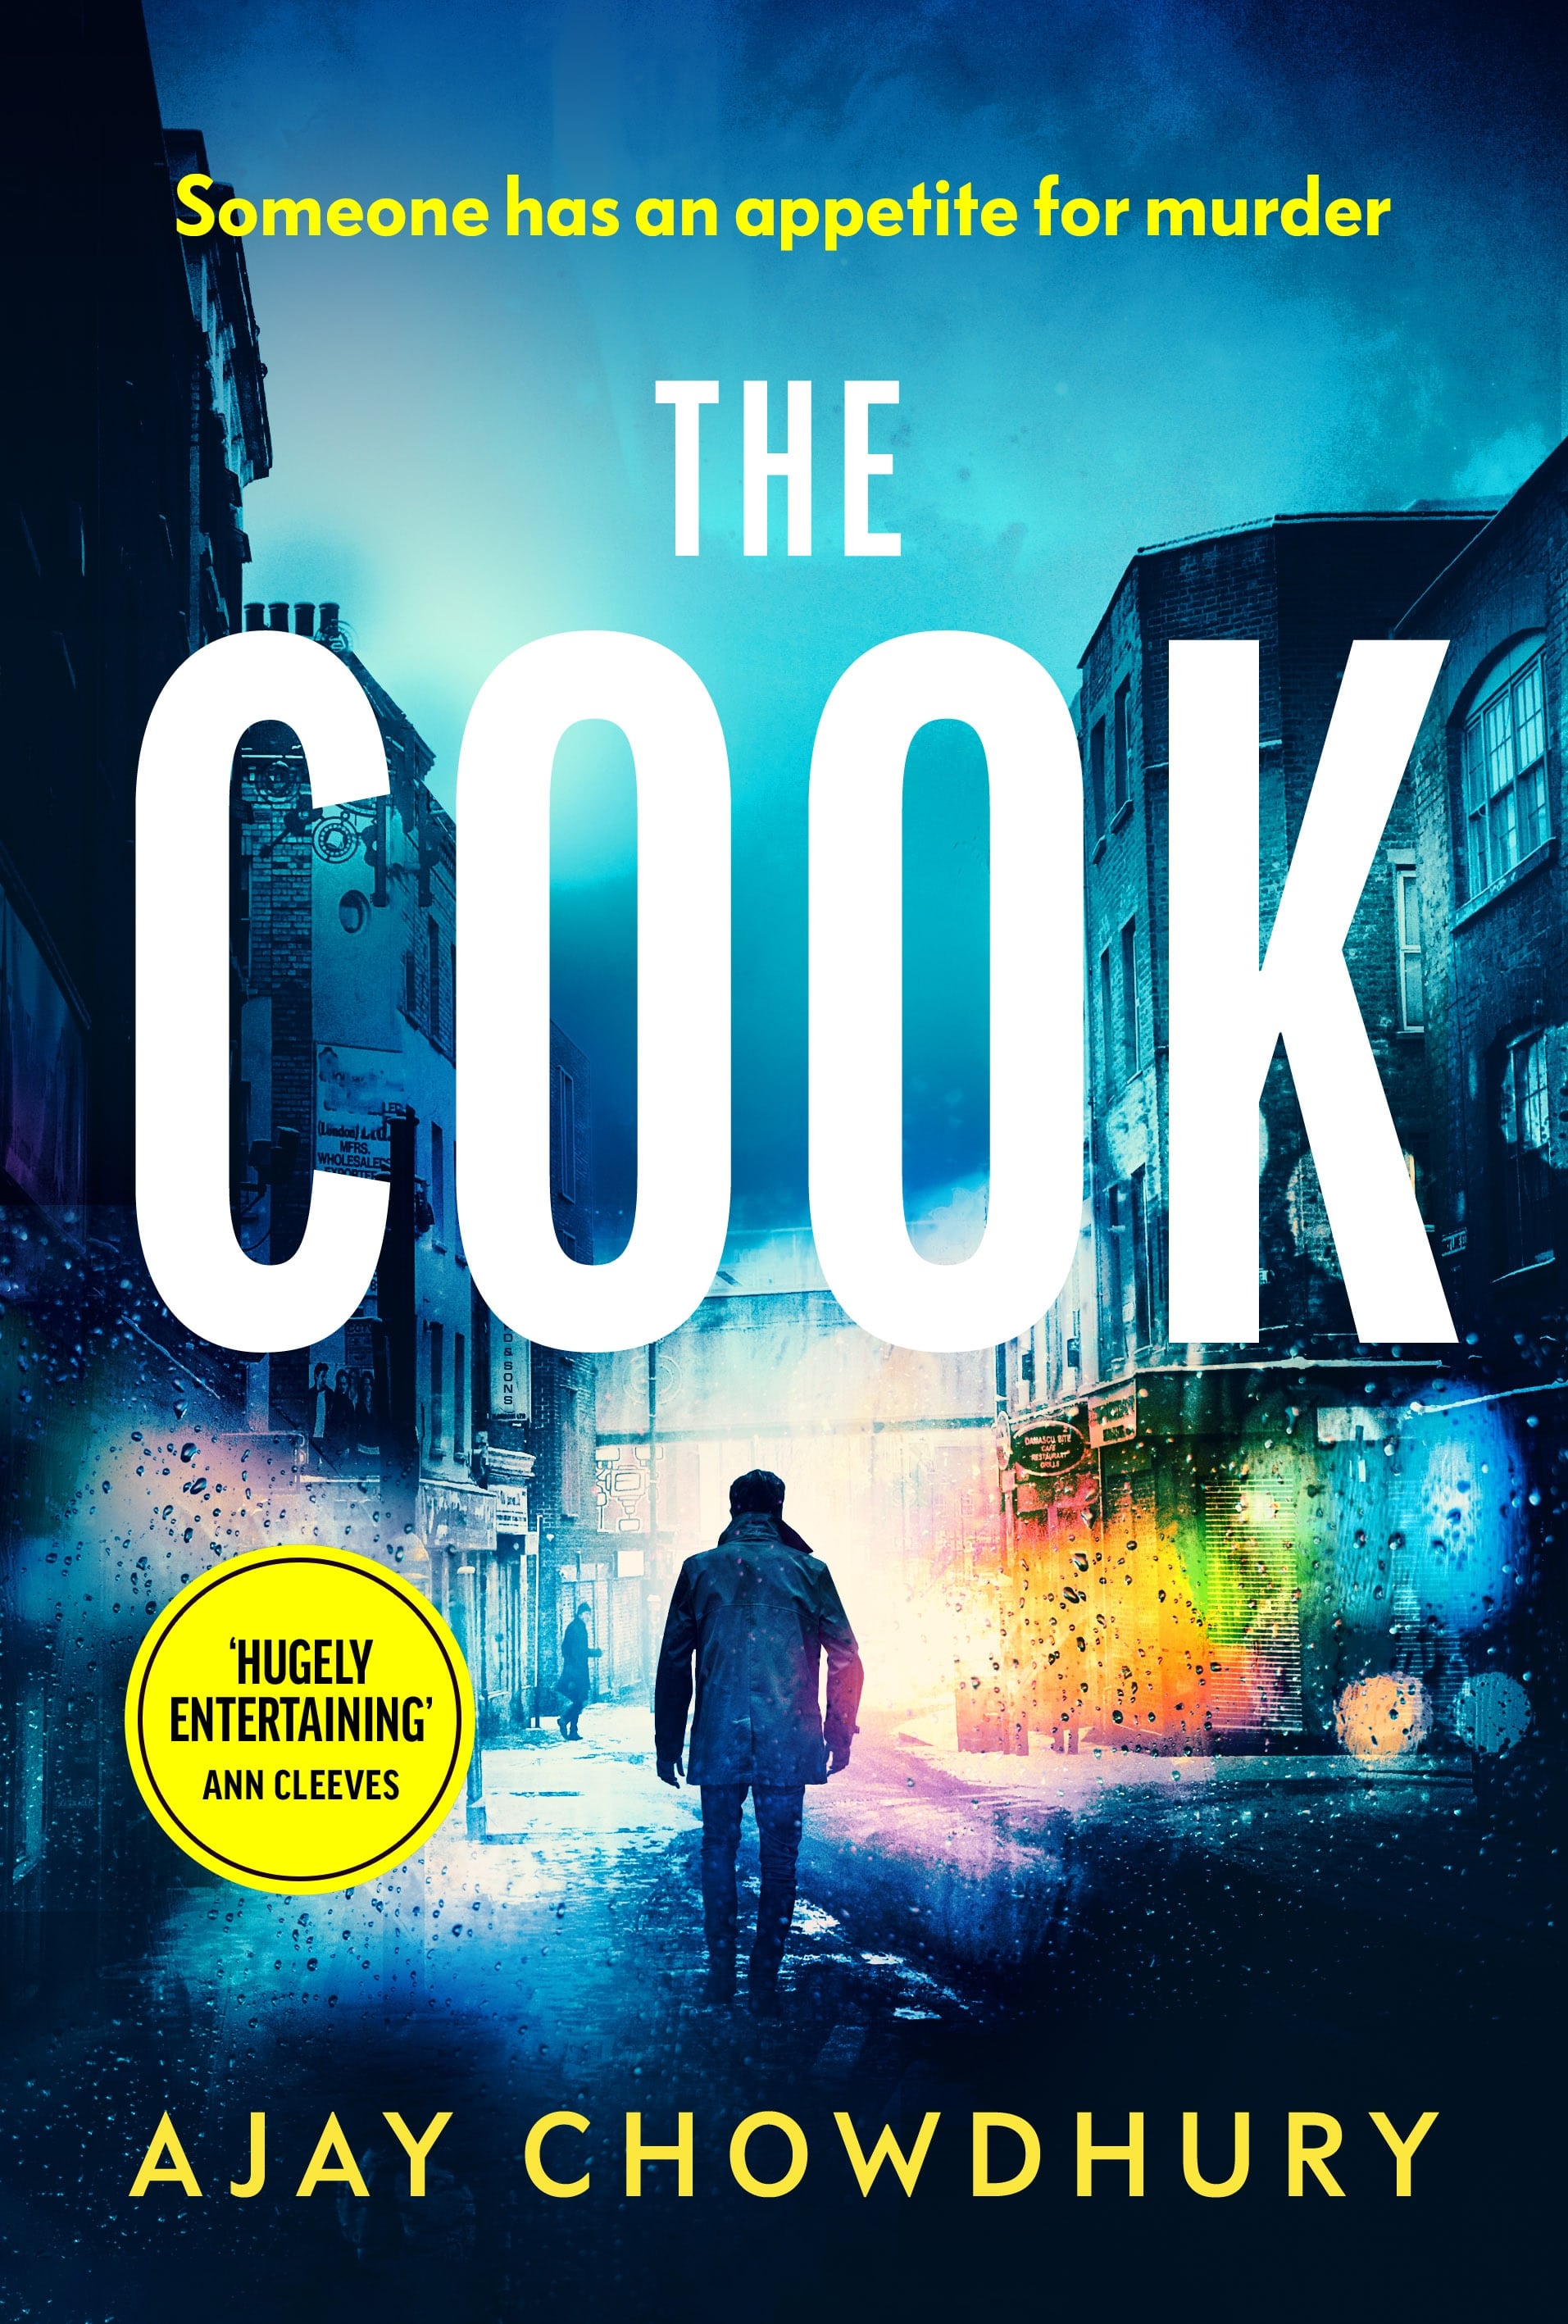 Book cover of The Cook by Ajay Chowdhury